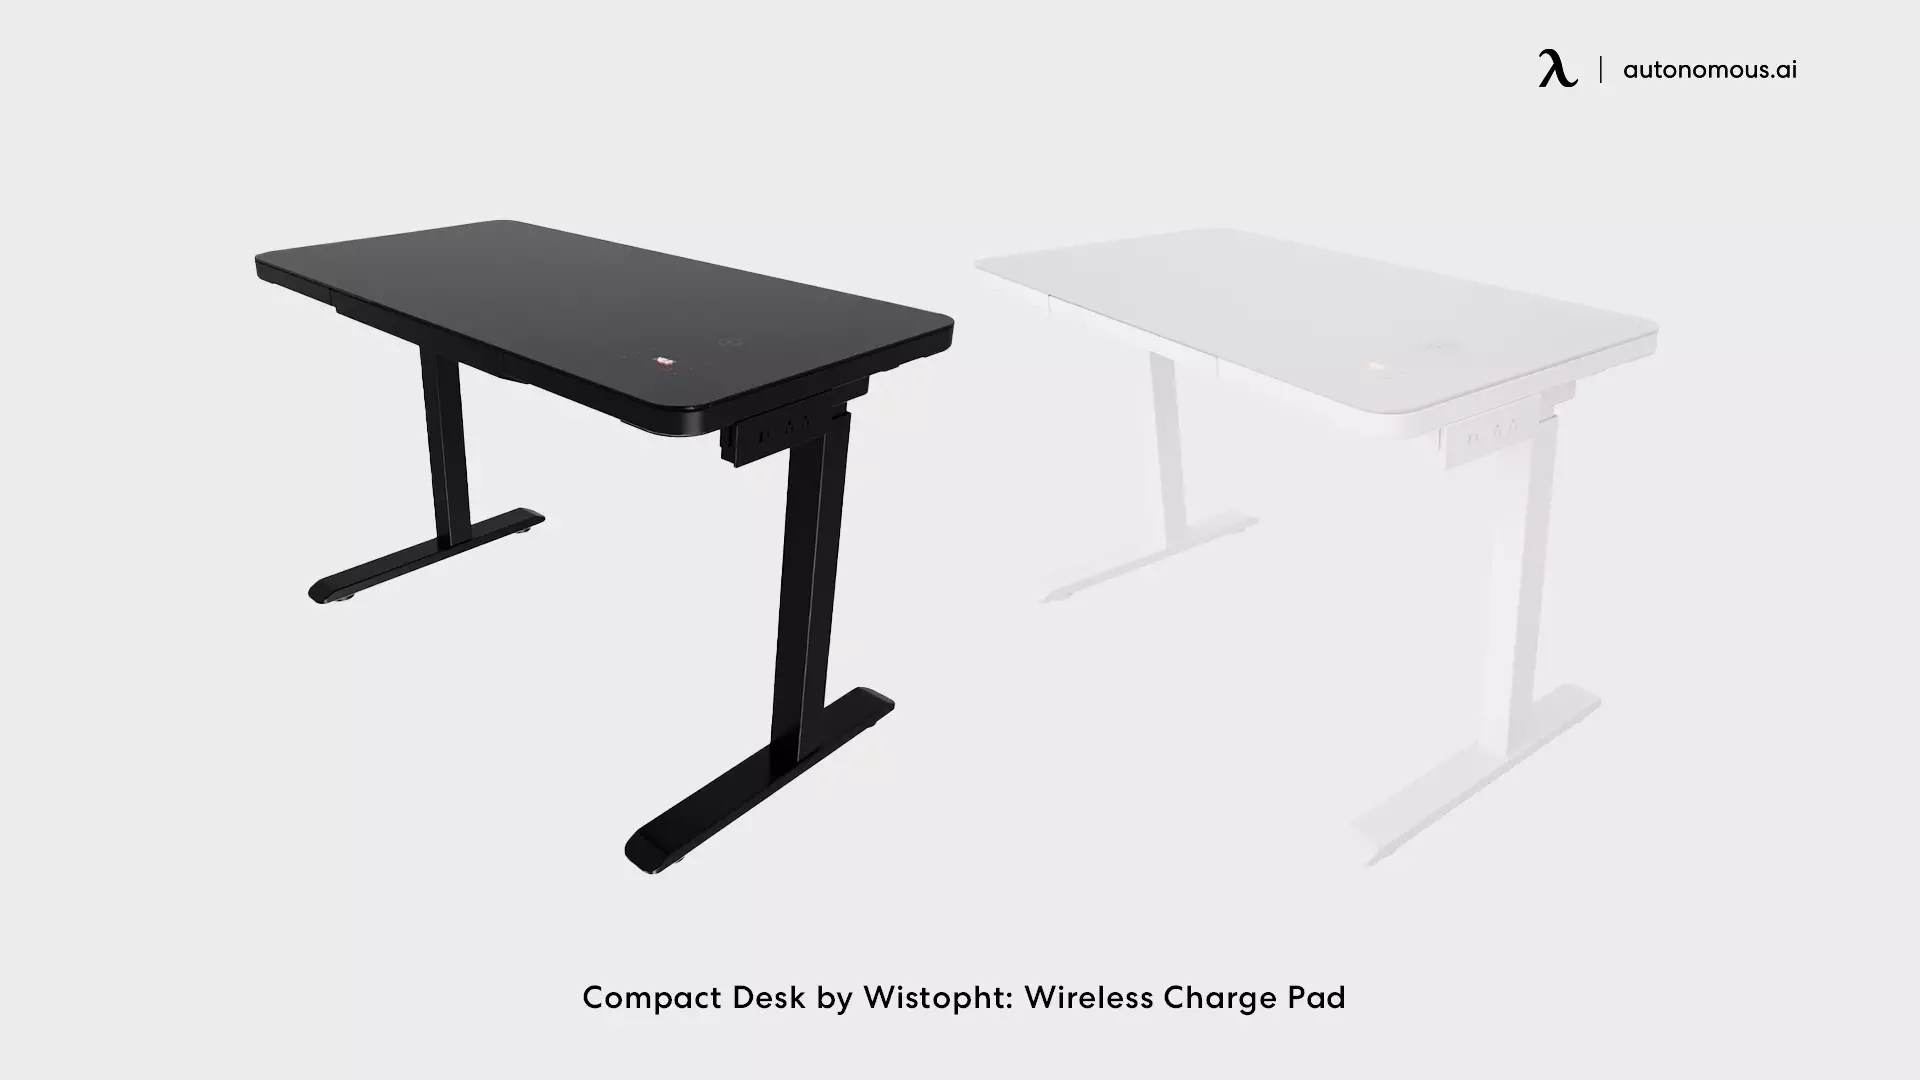 Wistopht CompactDesk: Wireless Charge Pad